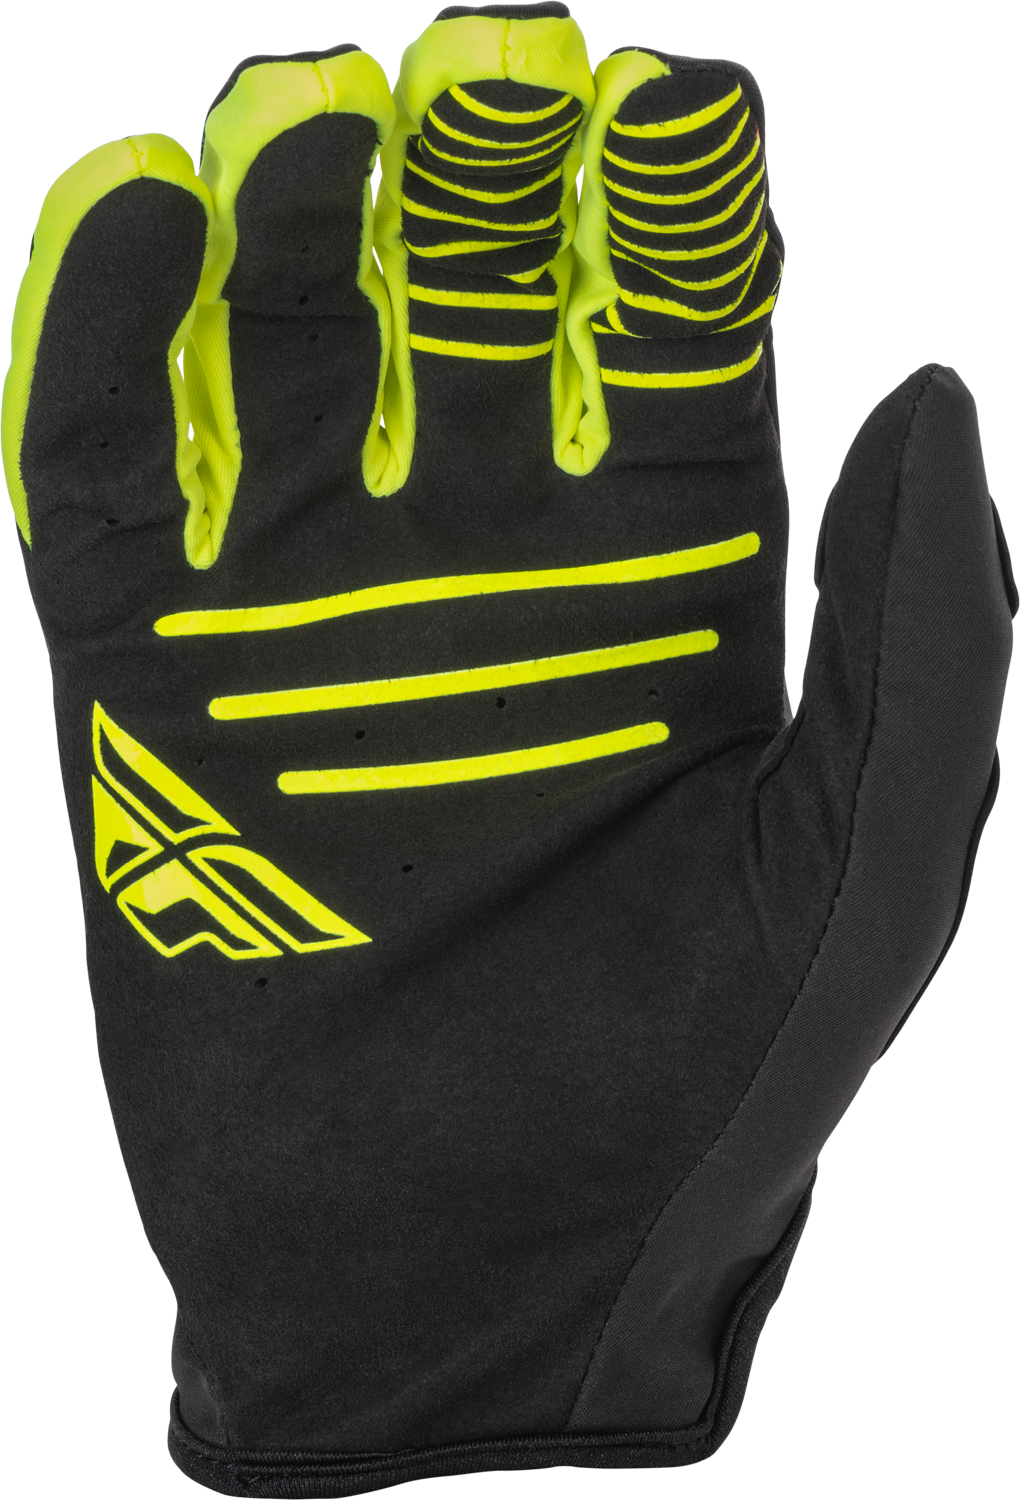 FLY Windproof Gloves